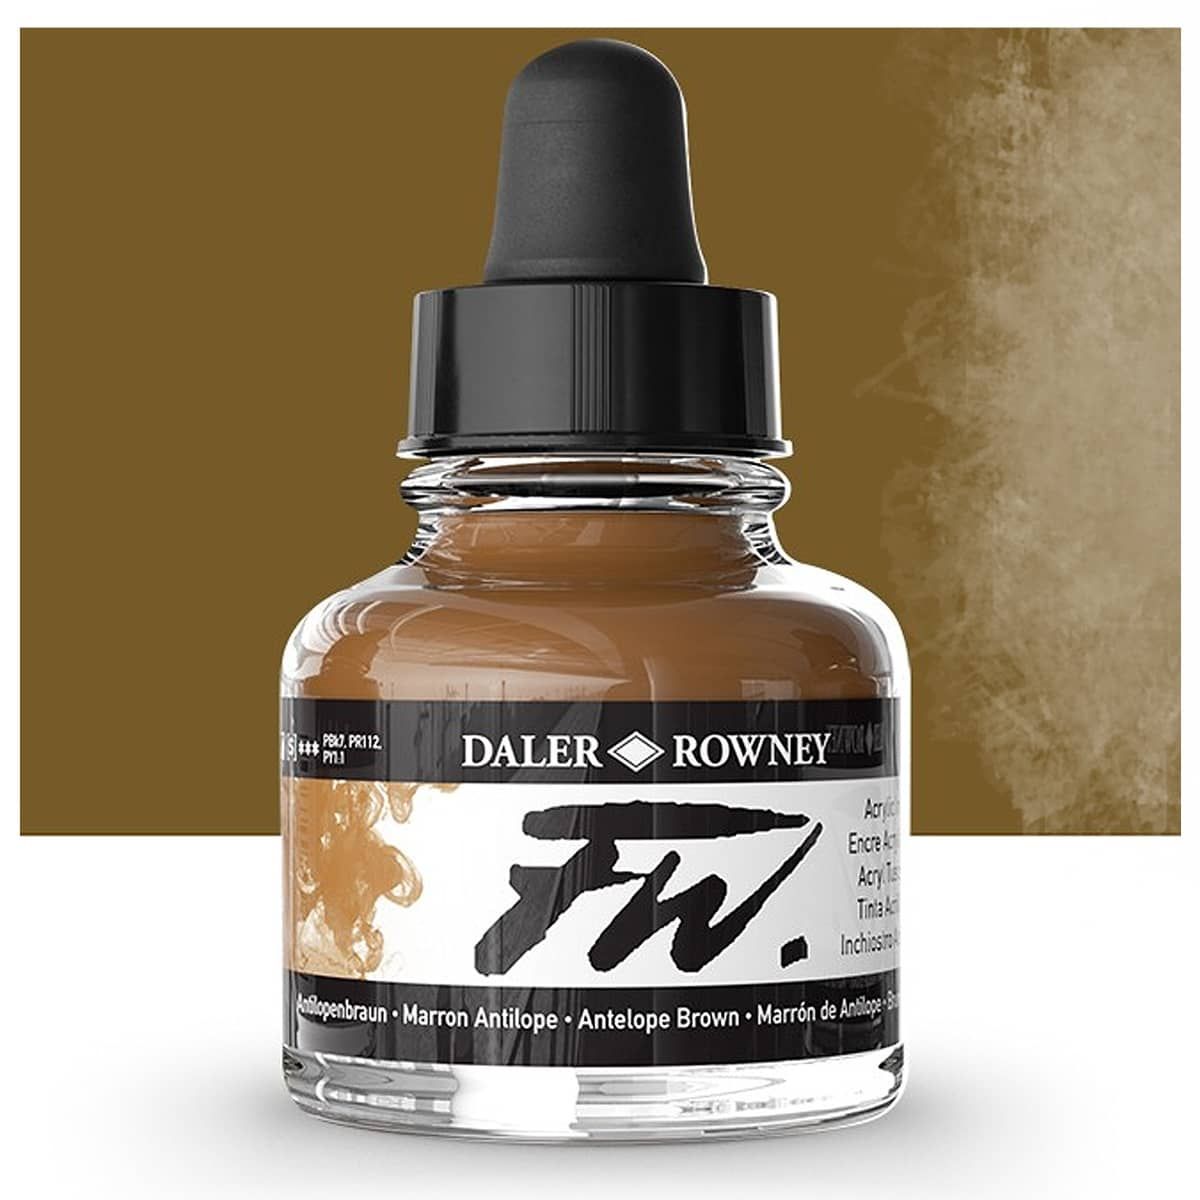 Daler-Rowney FW Acrylic Ink Bottle 3-Color Starter Set with Empty Marker -  Acrylic Set of Drawing Inks for Artists and Students - Art Ink Calligraphy